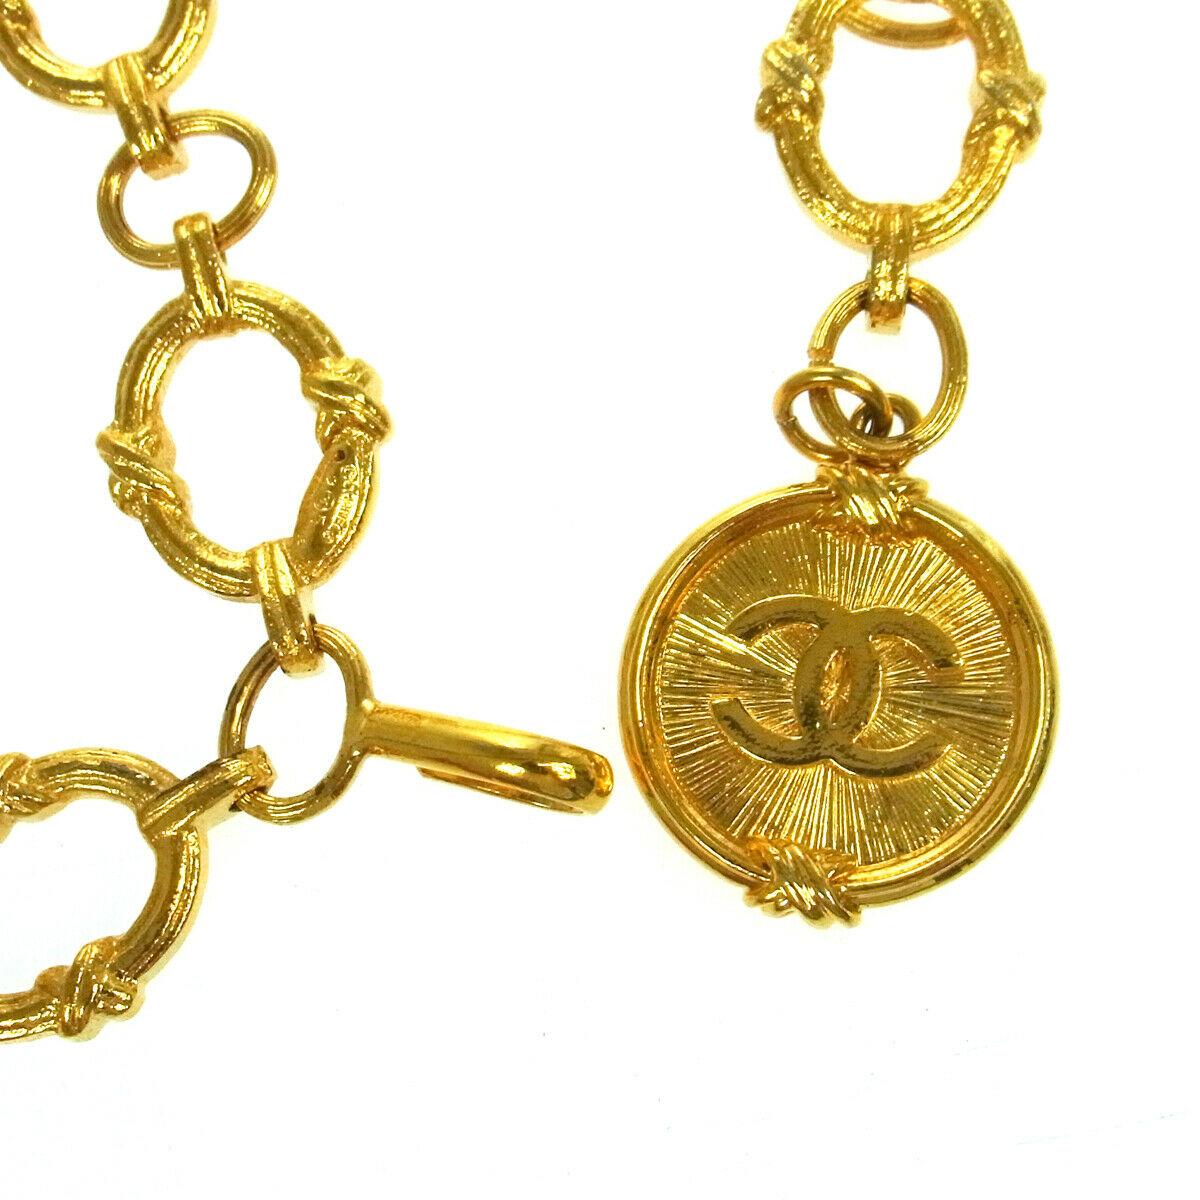 Chanel Gold Textured Metal Coin Medallion Chain Waist Belt

Metal 
Gold tone hardware
Hook closure
Made in France
Width 1